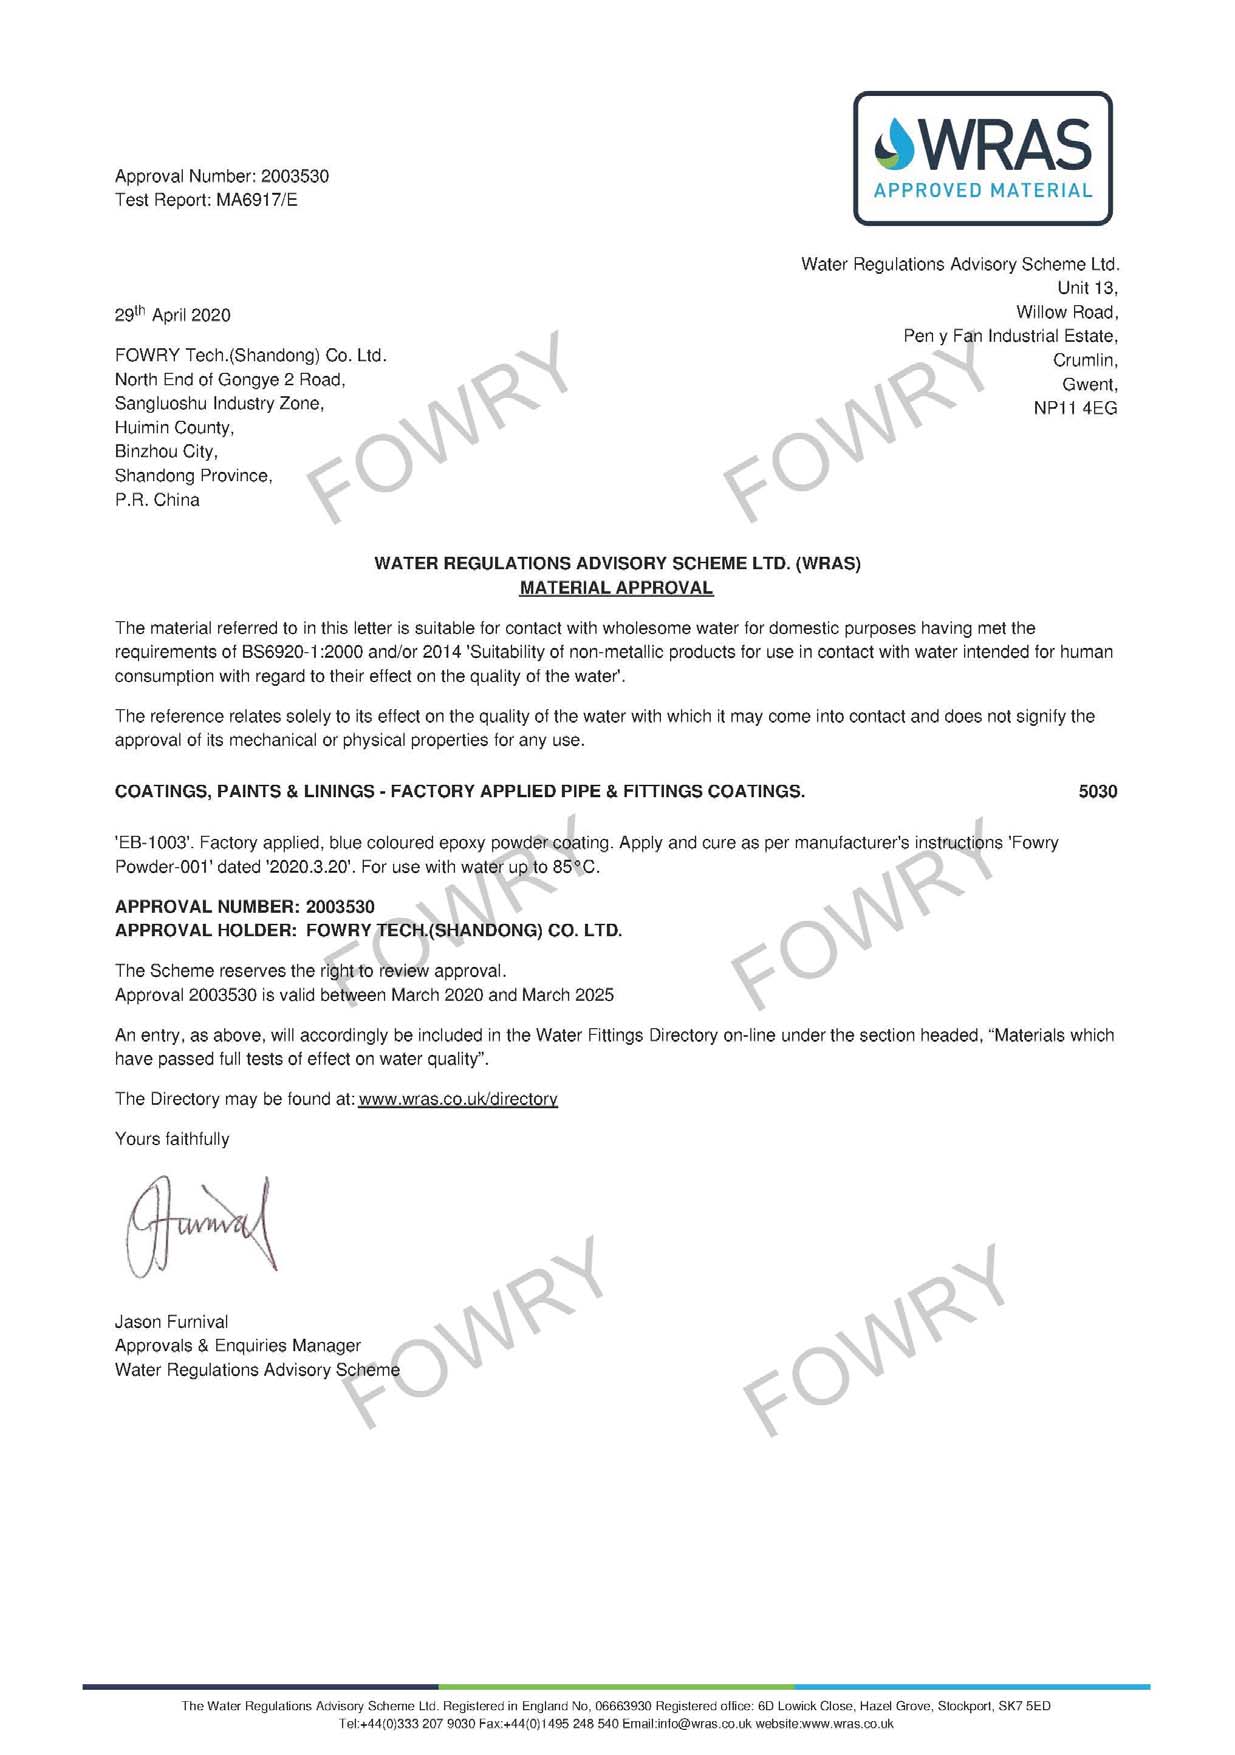 FOWRY WRAS Certificate of Coating used for hot water